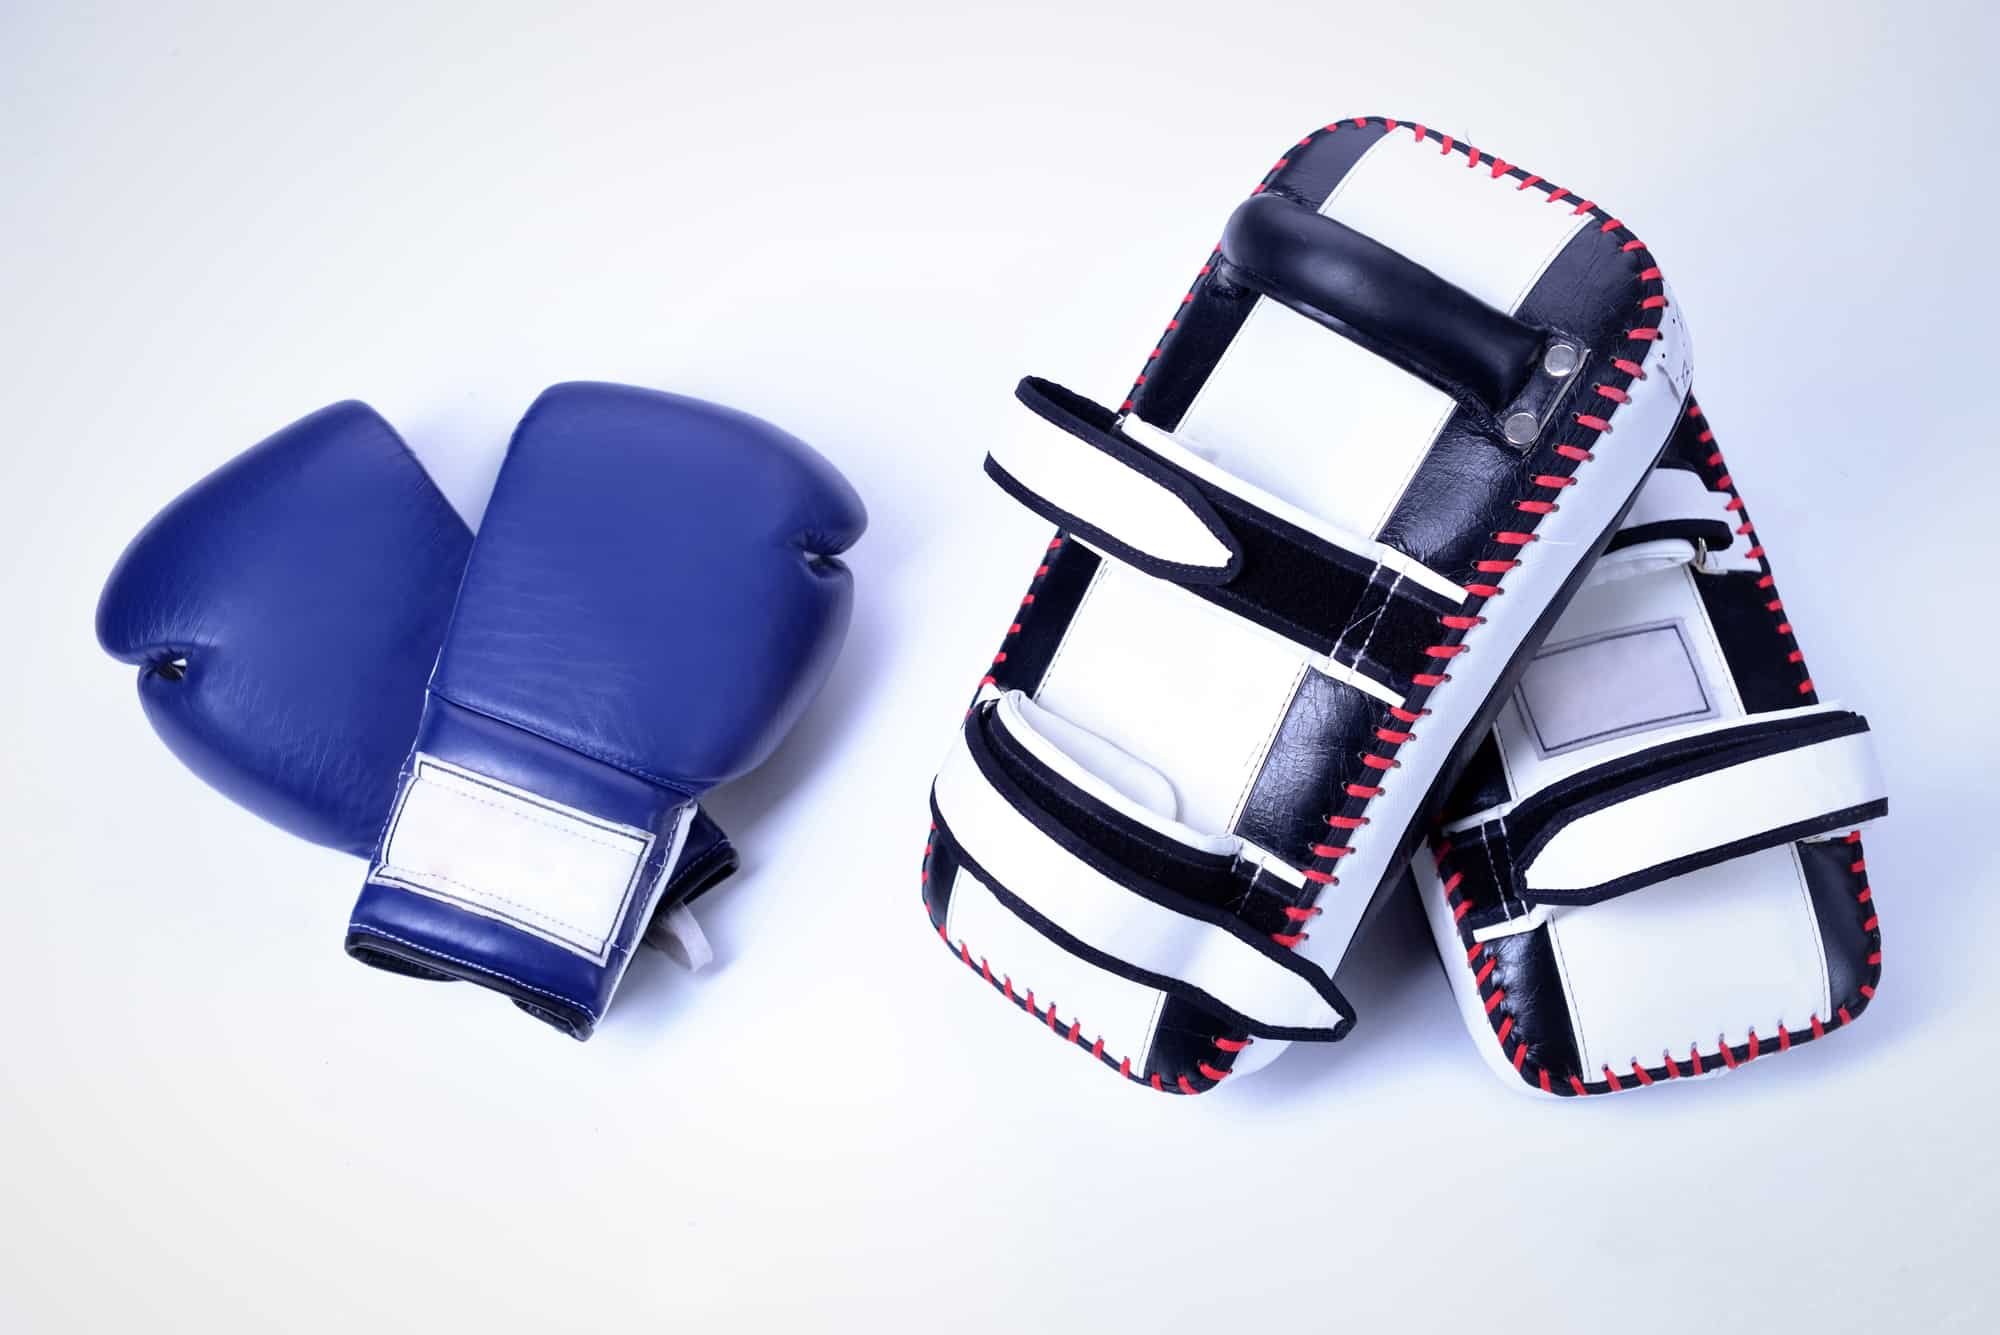 Where to Buy Muay Thai Gear Online